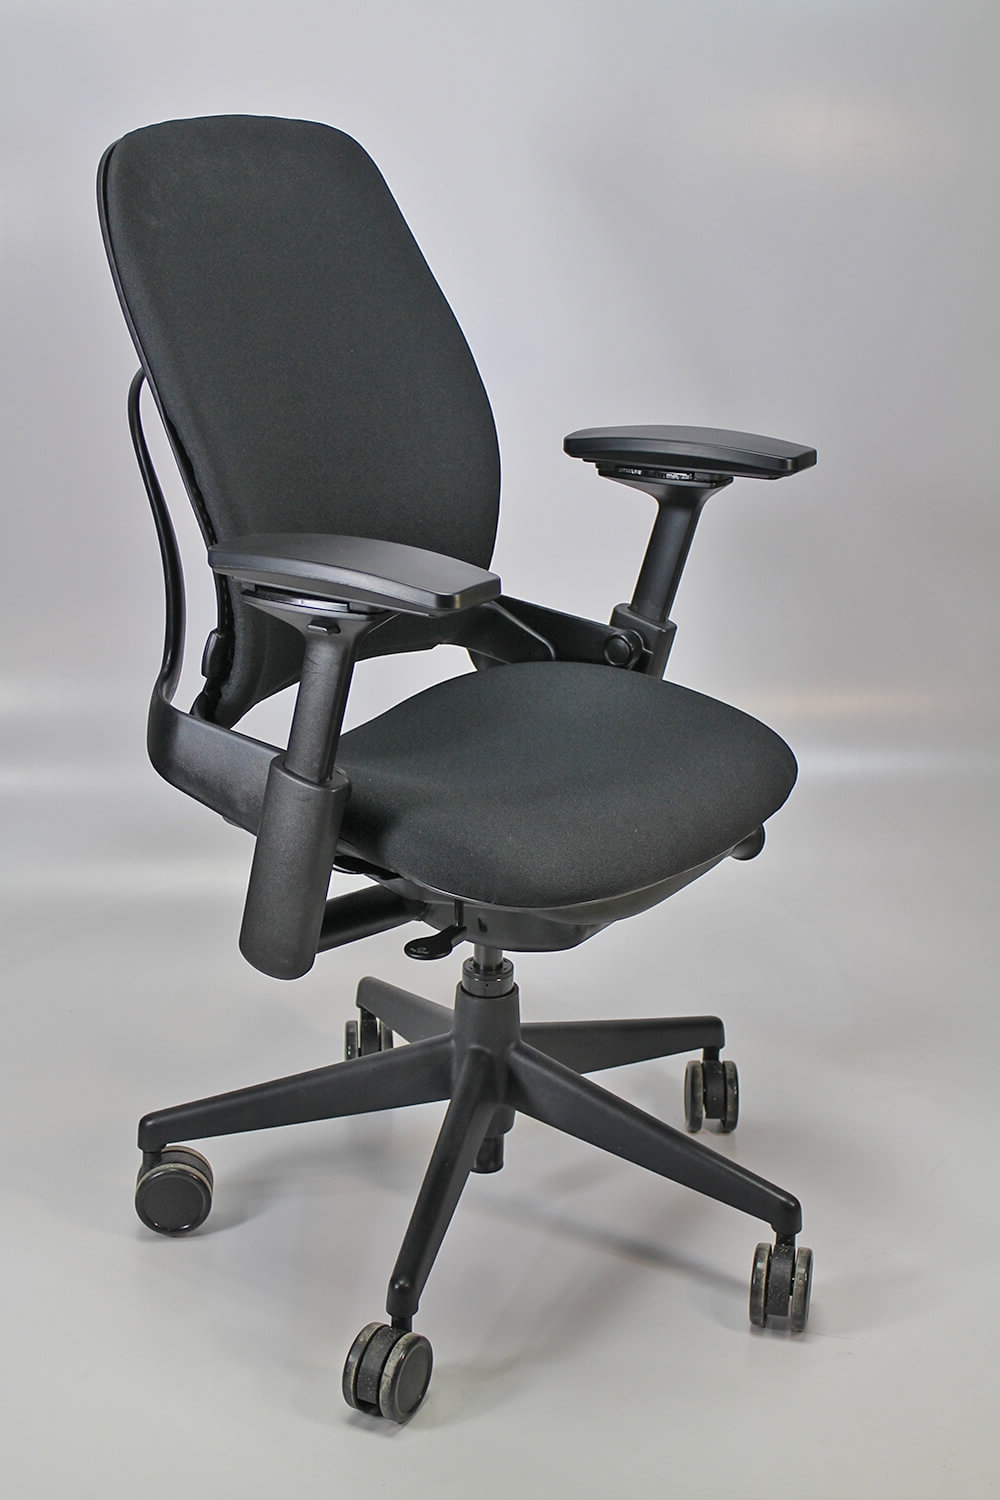 https://www.cubicles.com/shop/images/steelcase-chairs-steelcase-leap-v2.jpg